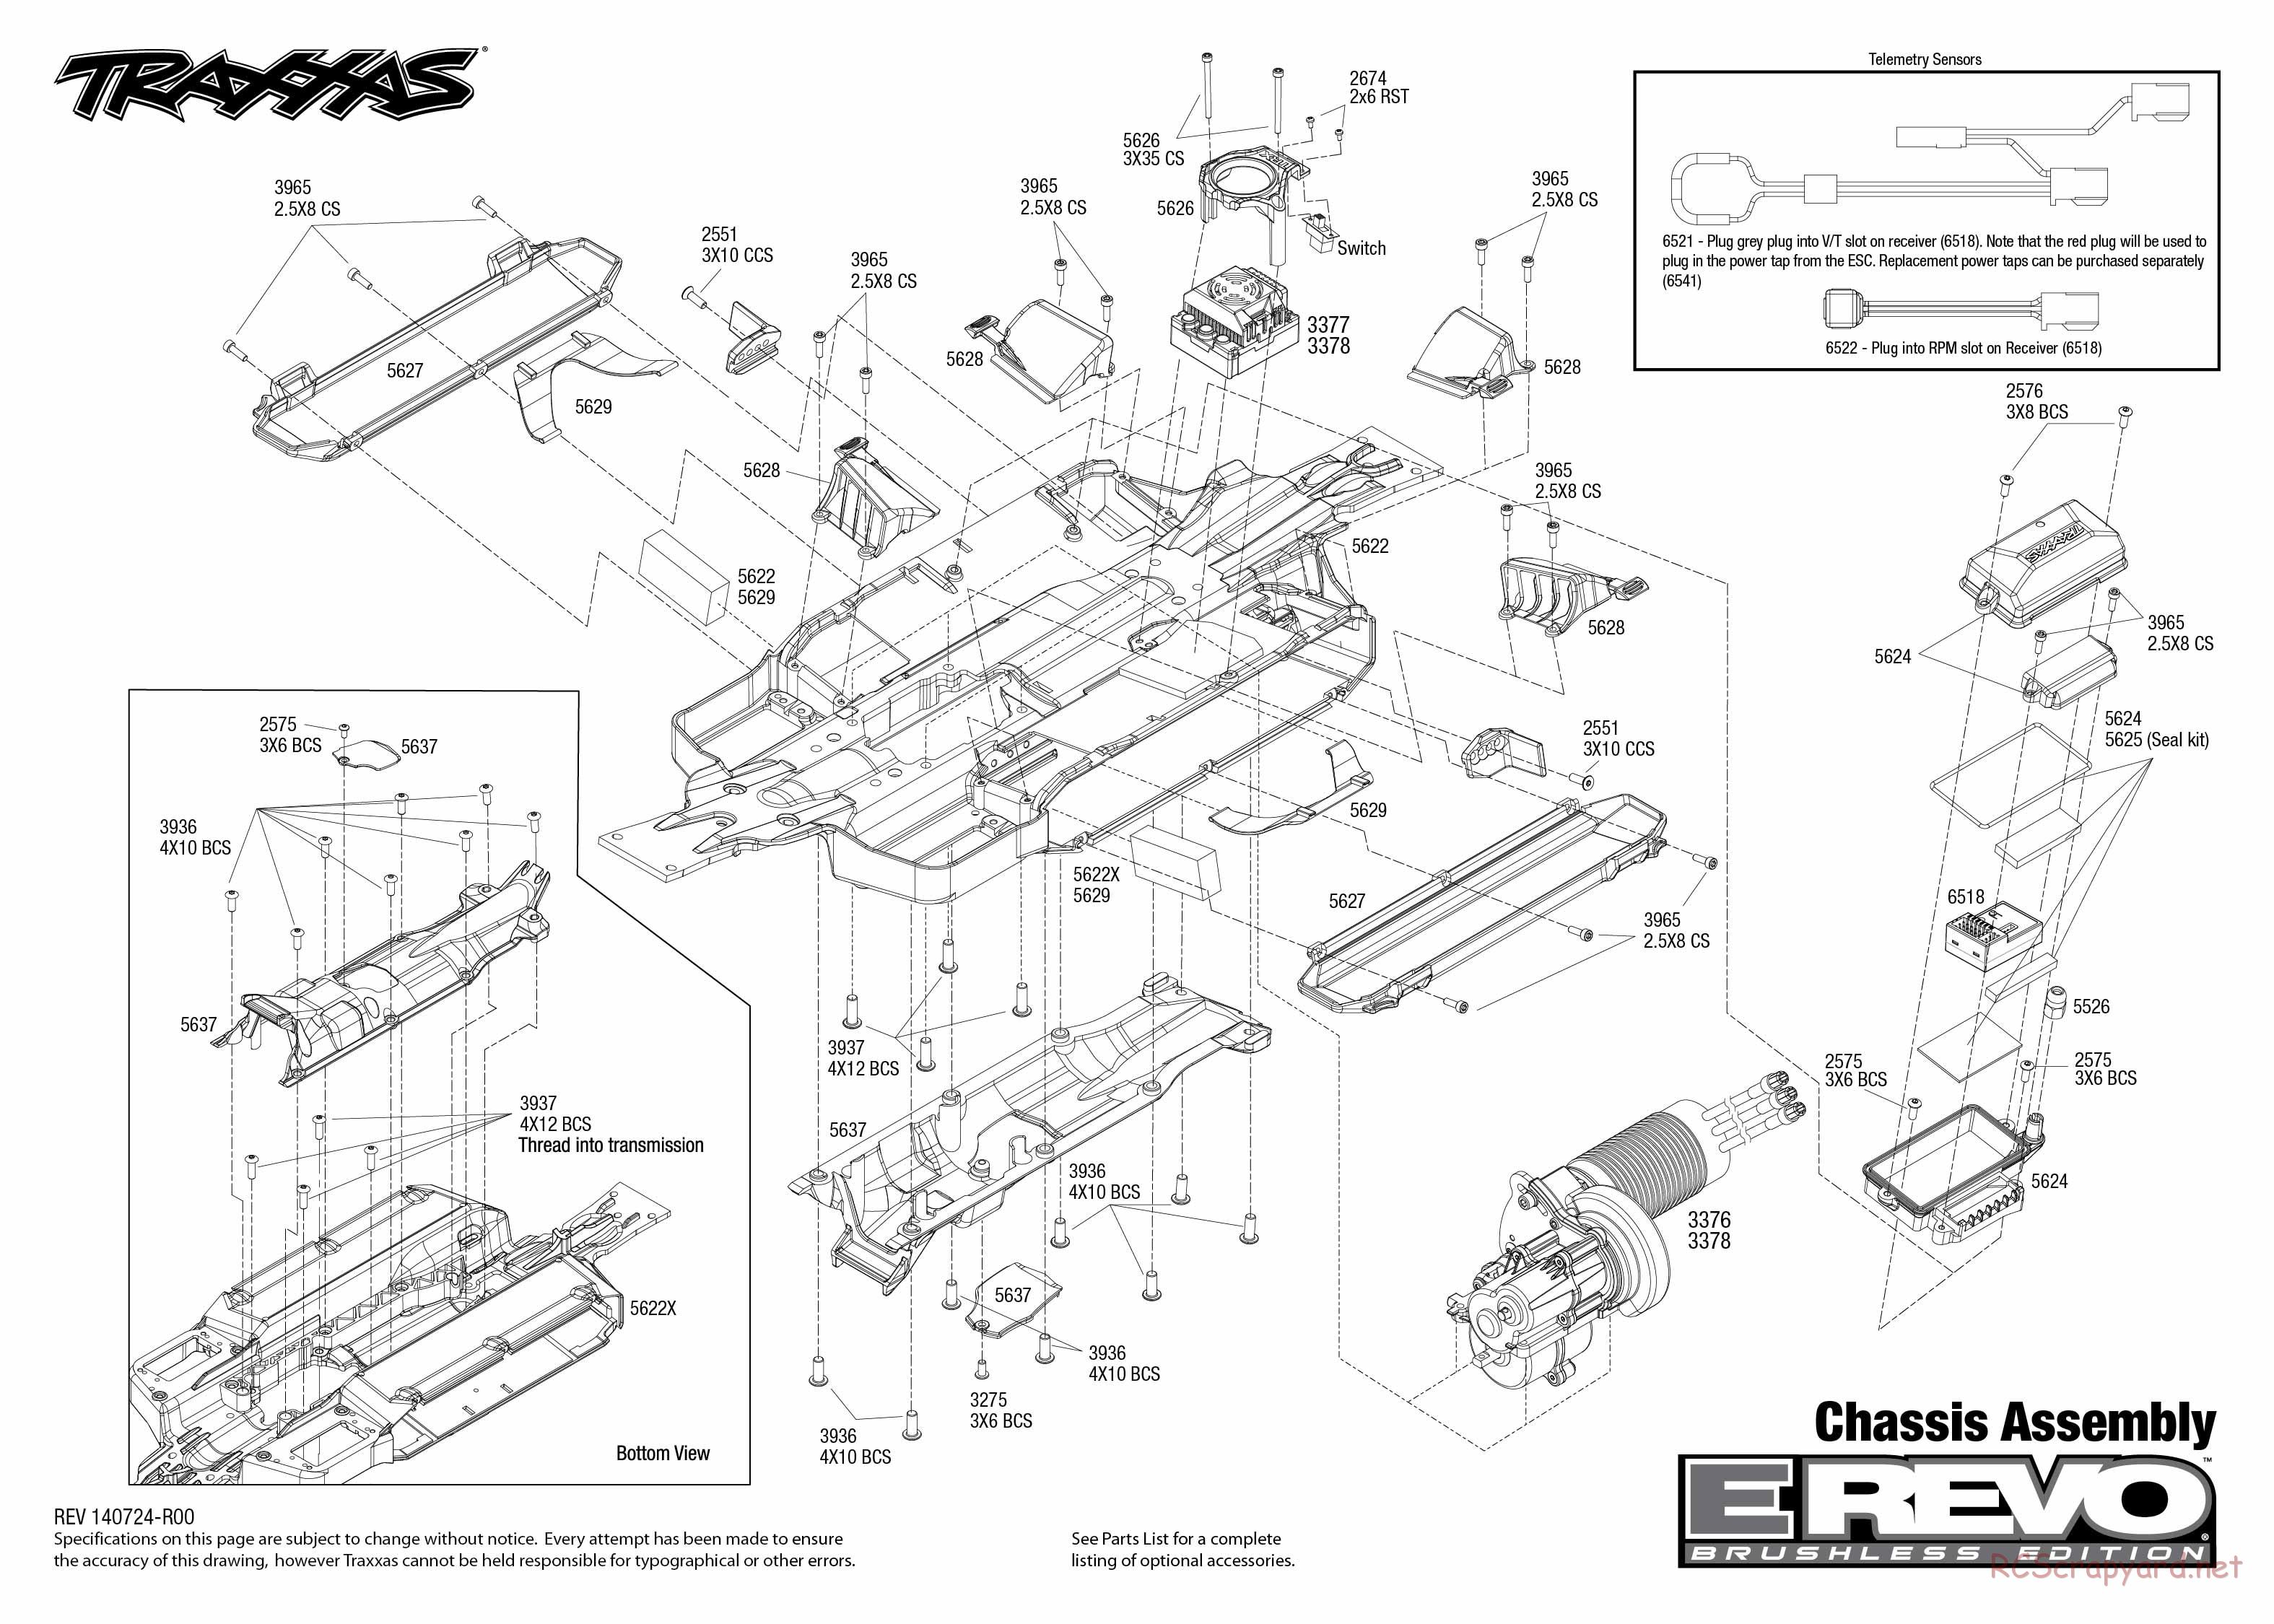 Traxxas - E-Revo Brushless (2015) - Exploded Views - Page 1